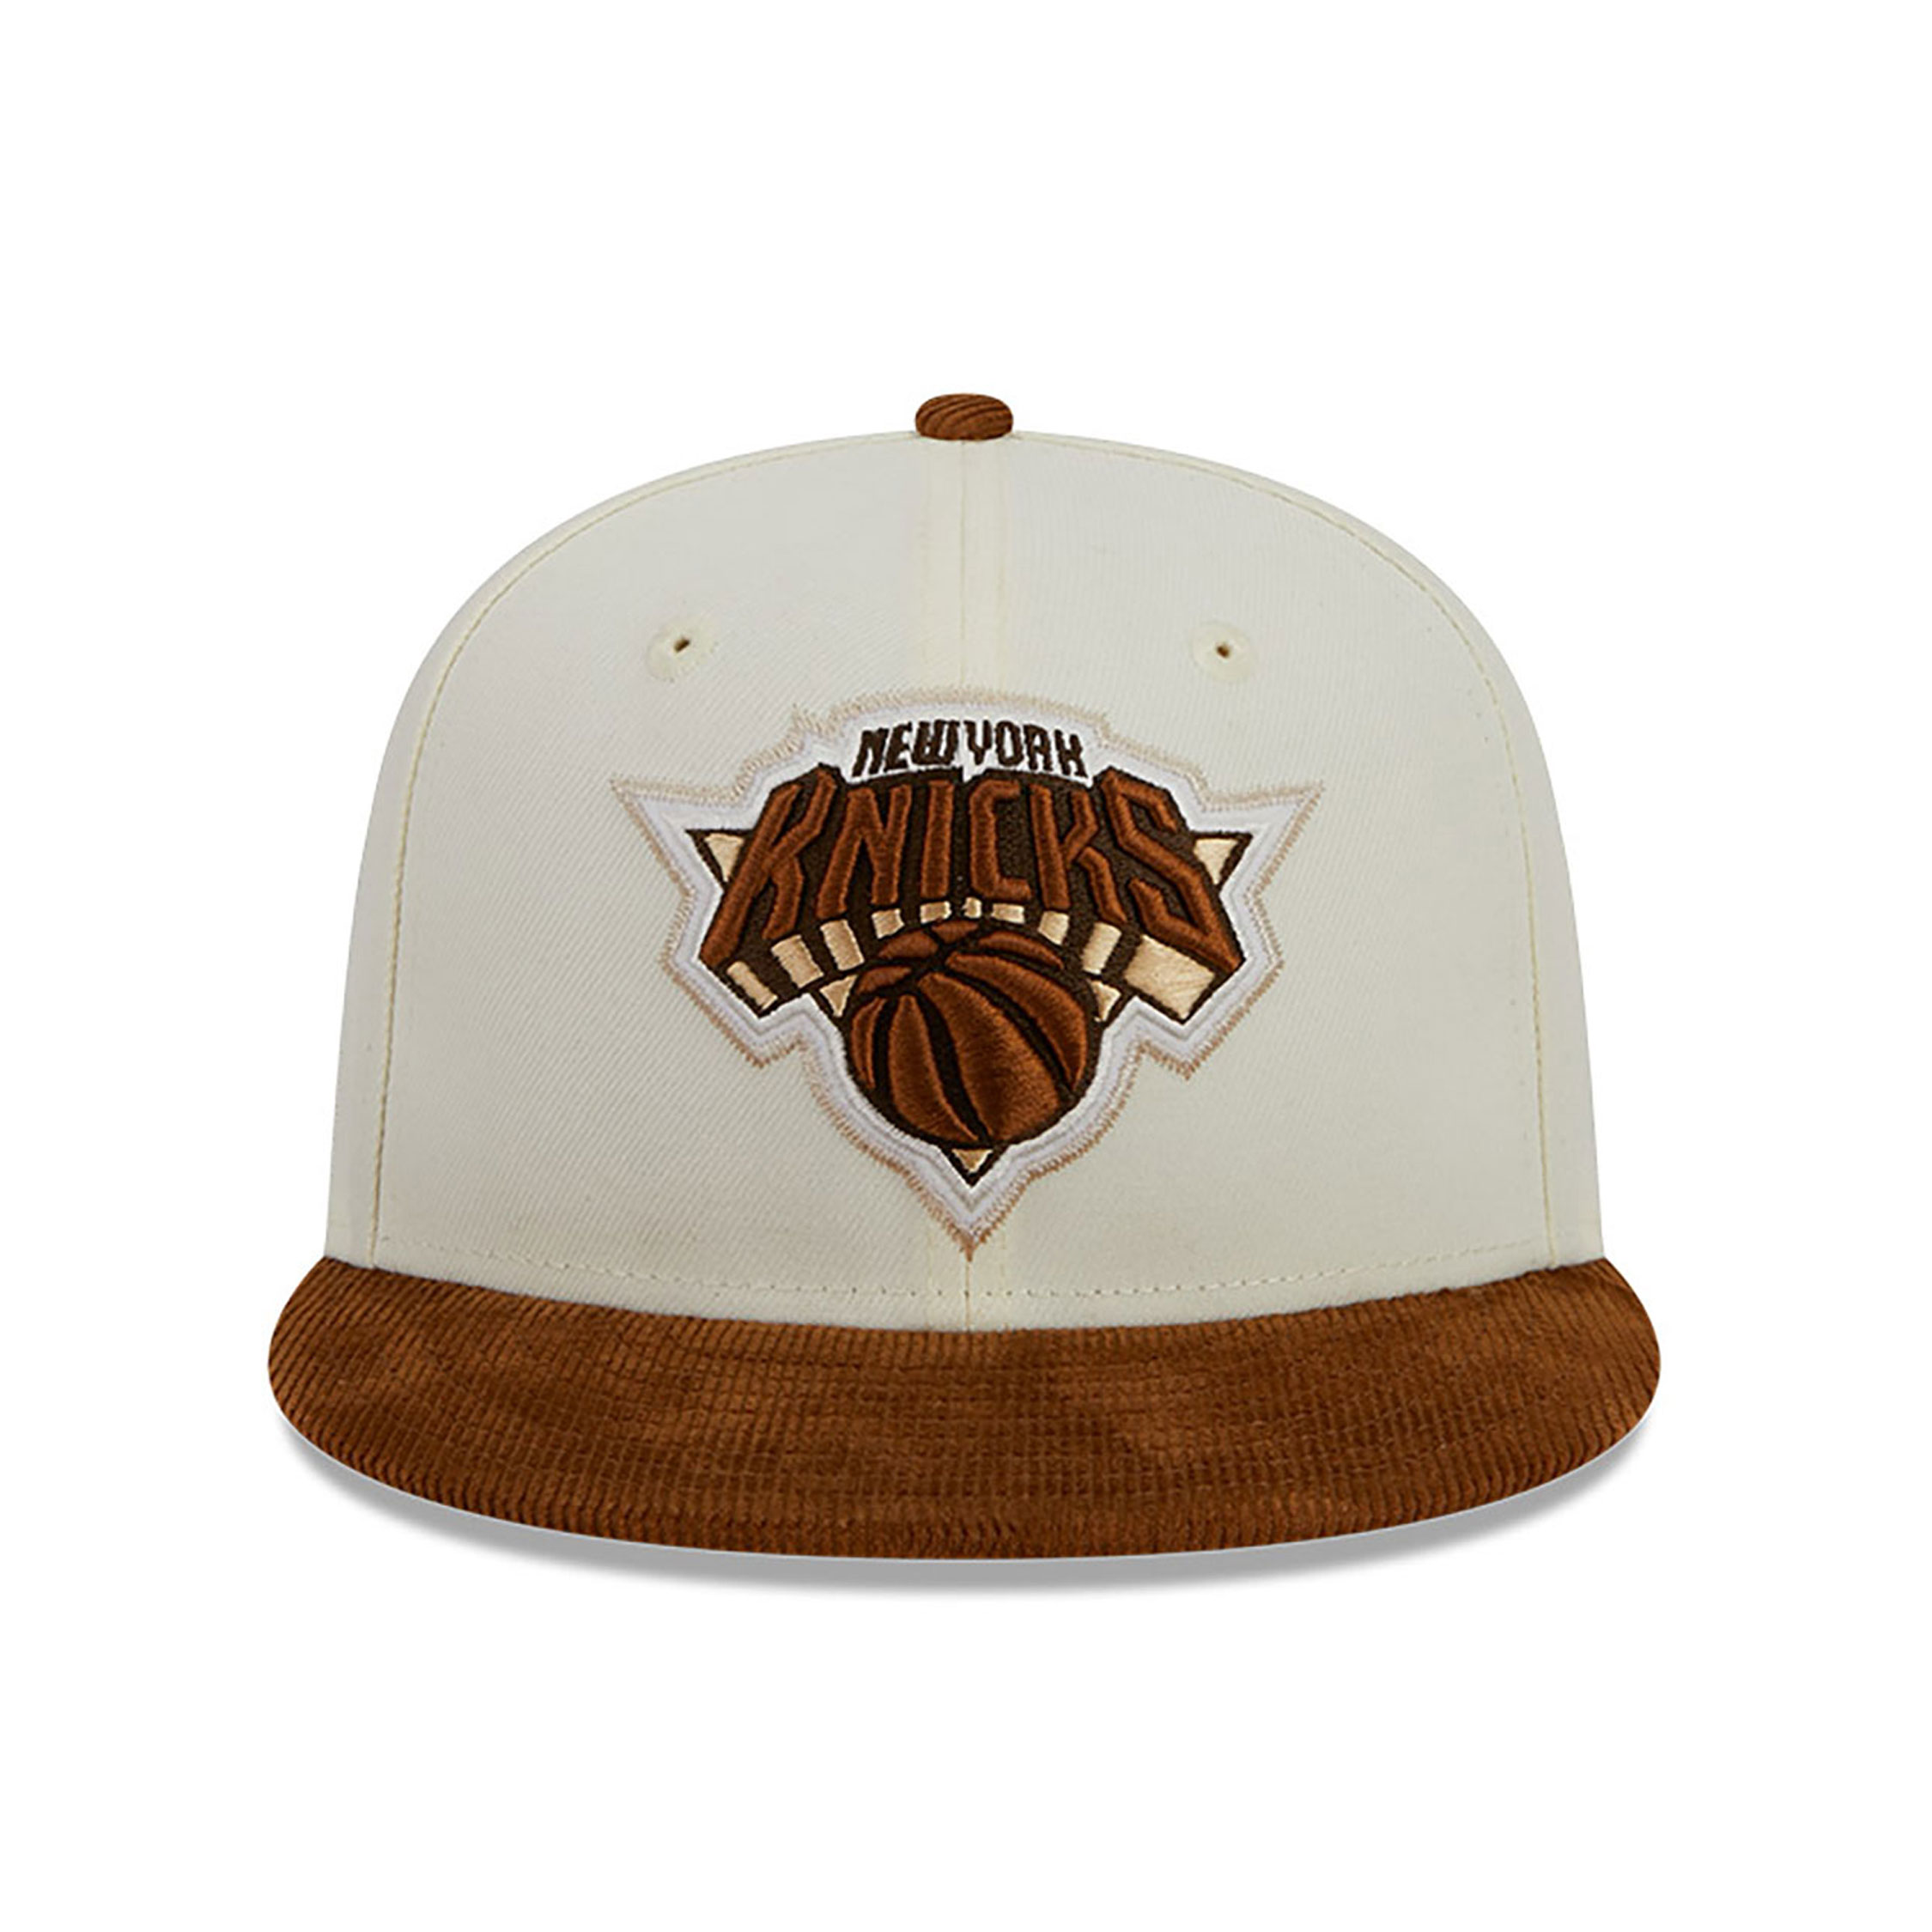 New York Knicks Cord Visor White 59FIFTY Fitted Cap